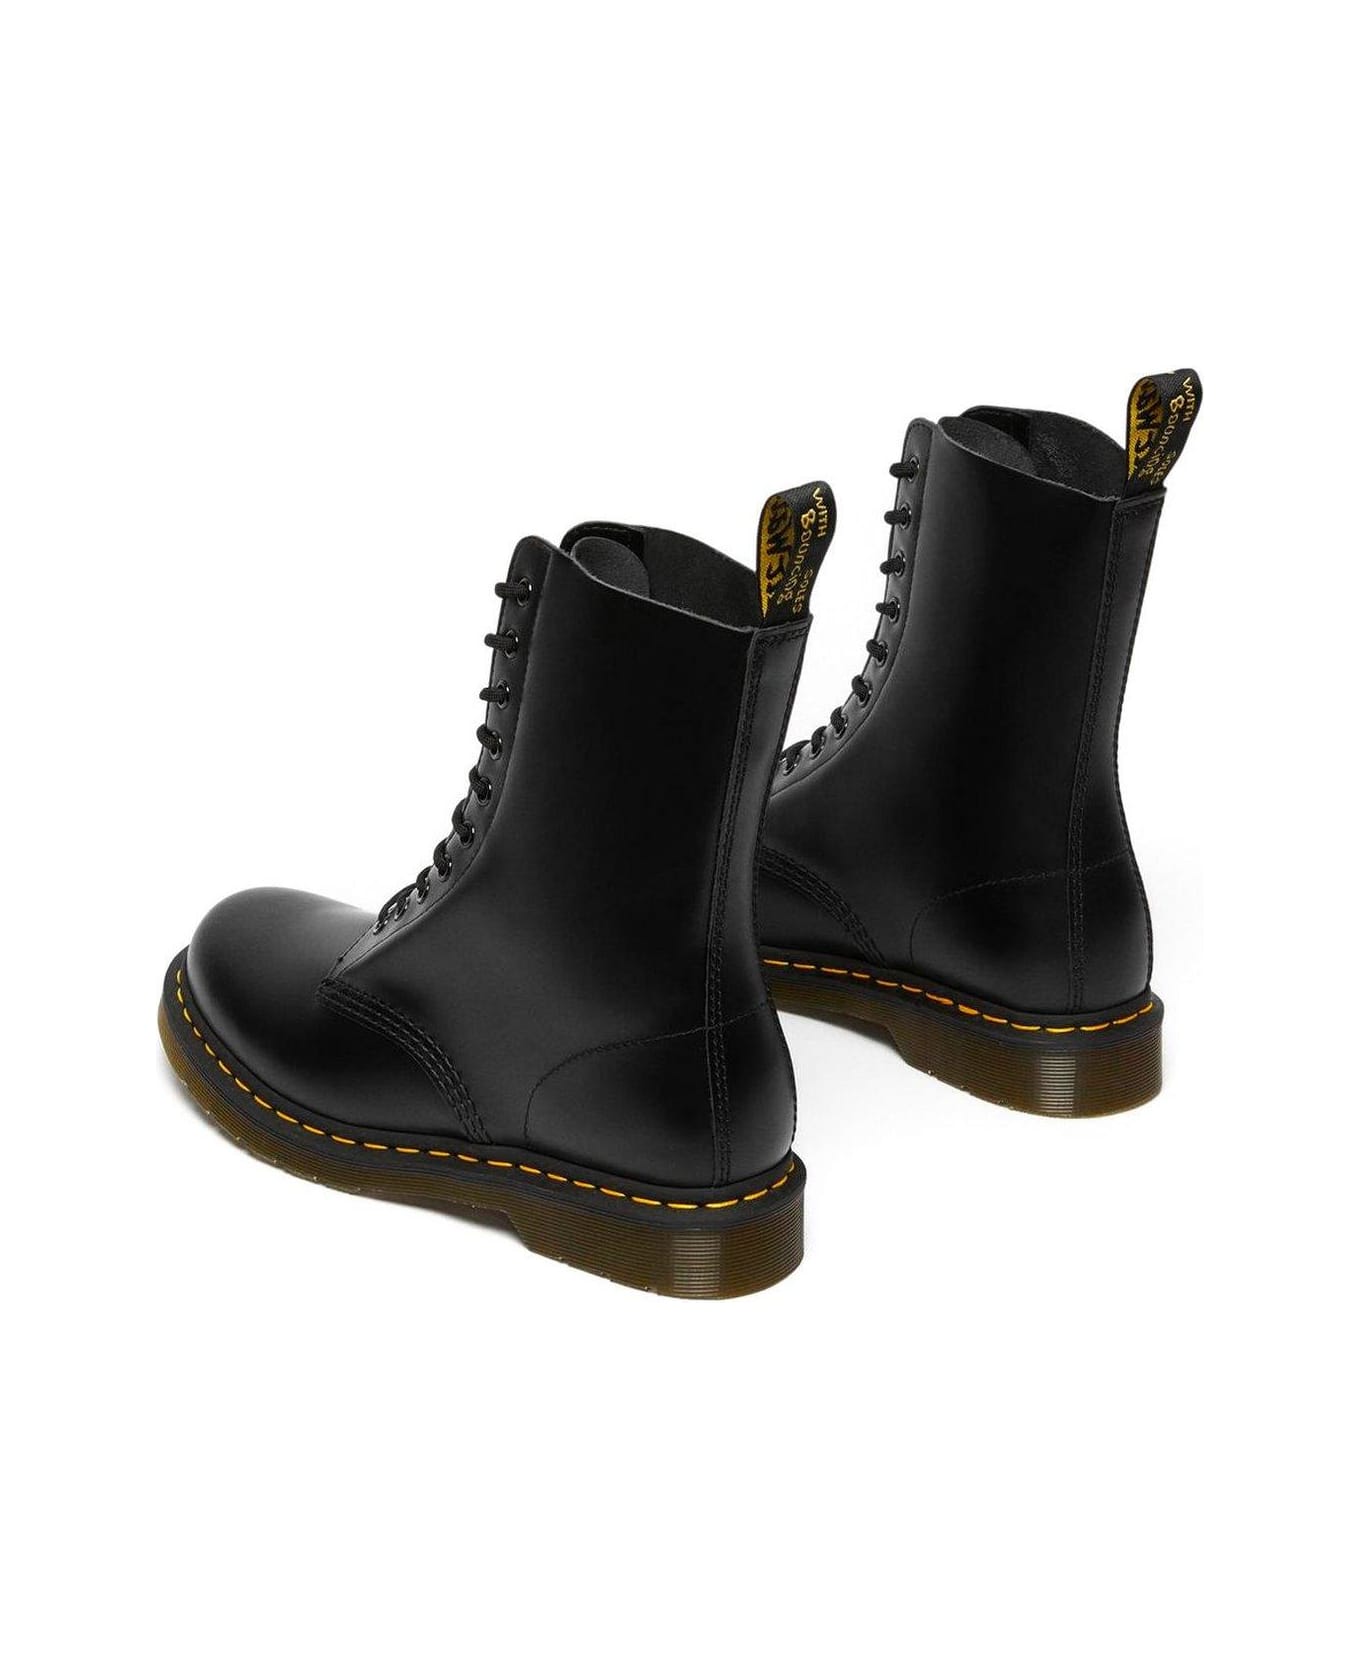 Dr. Martens 1490 Smooth Lace-up Boots シューズ